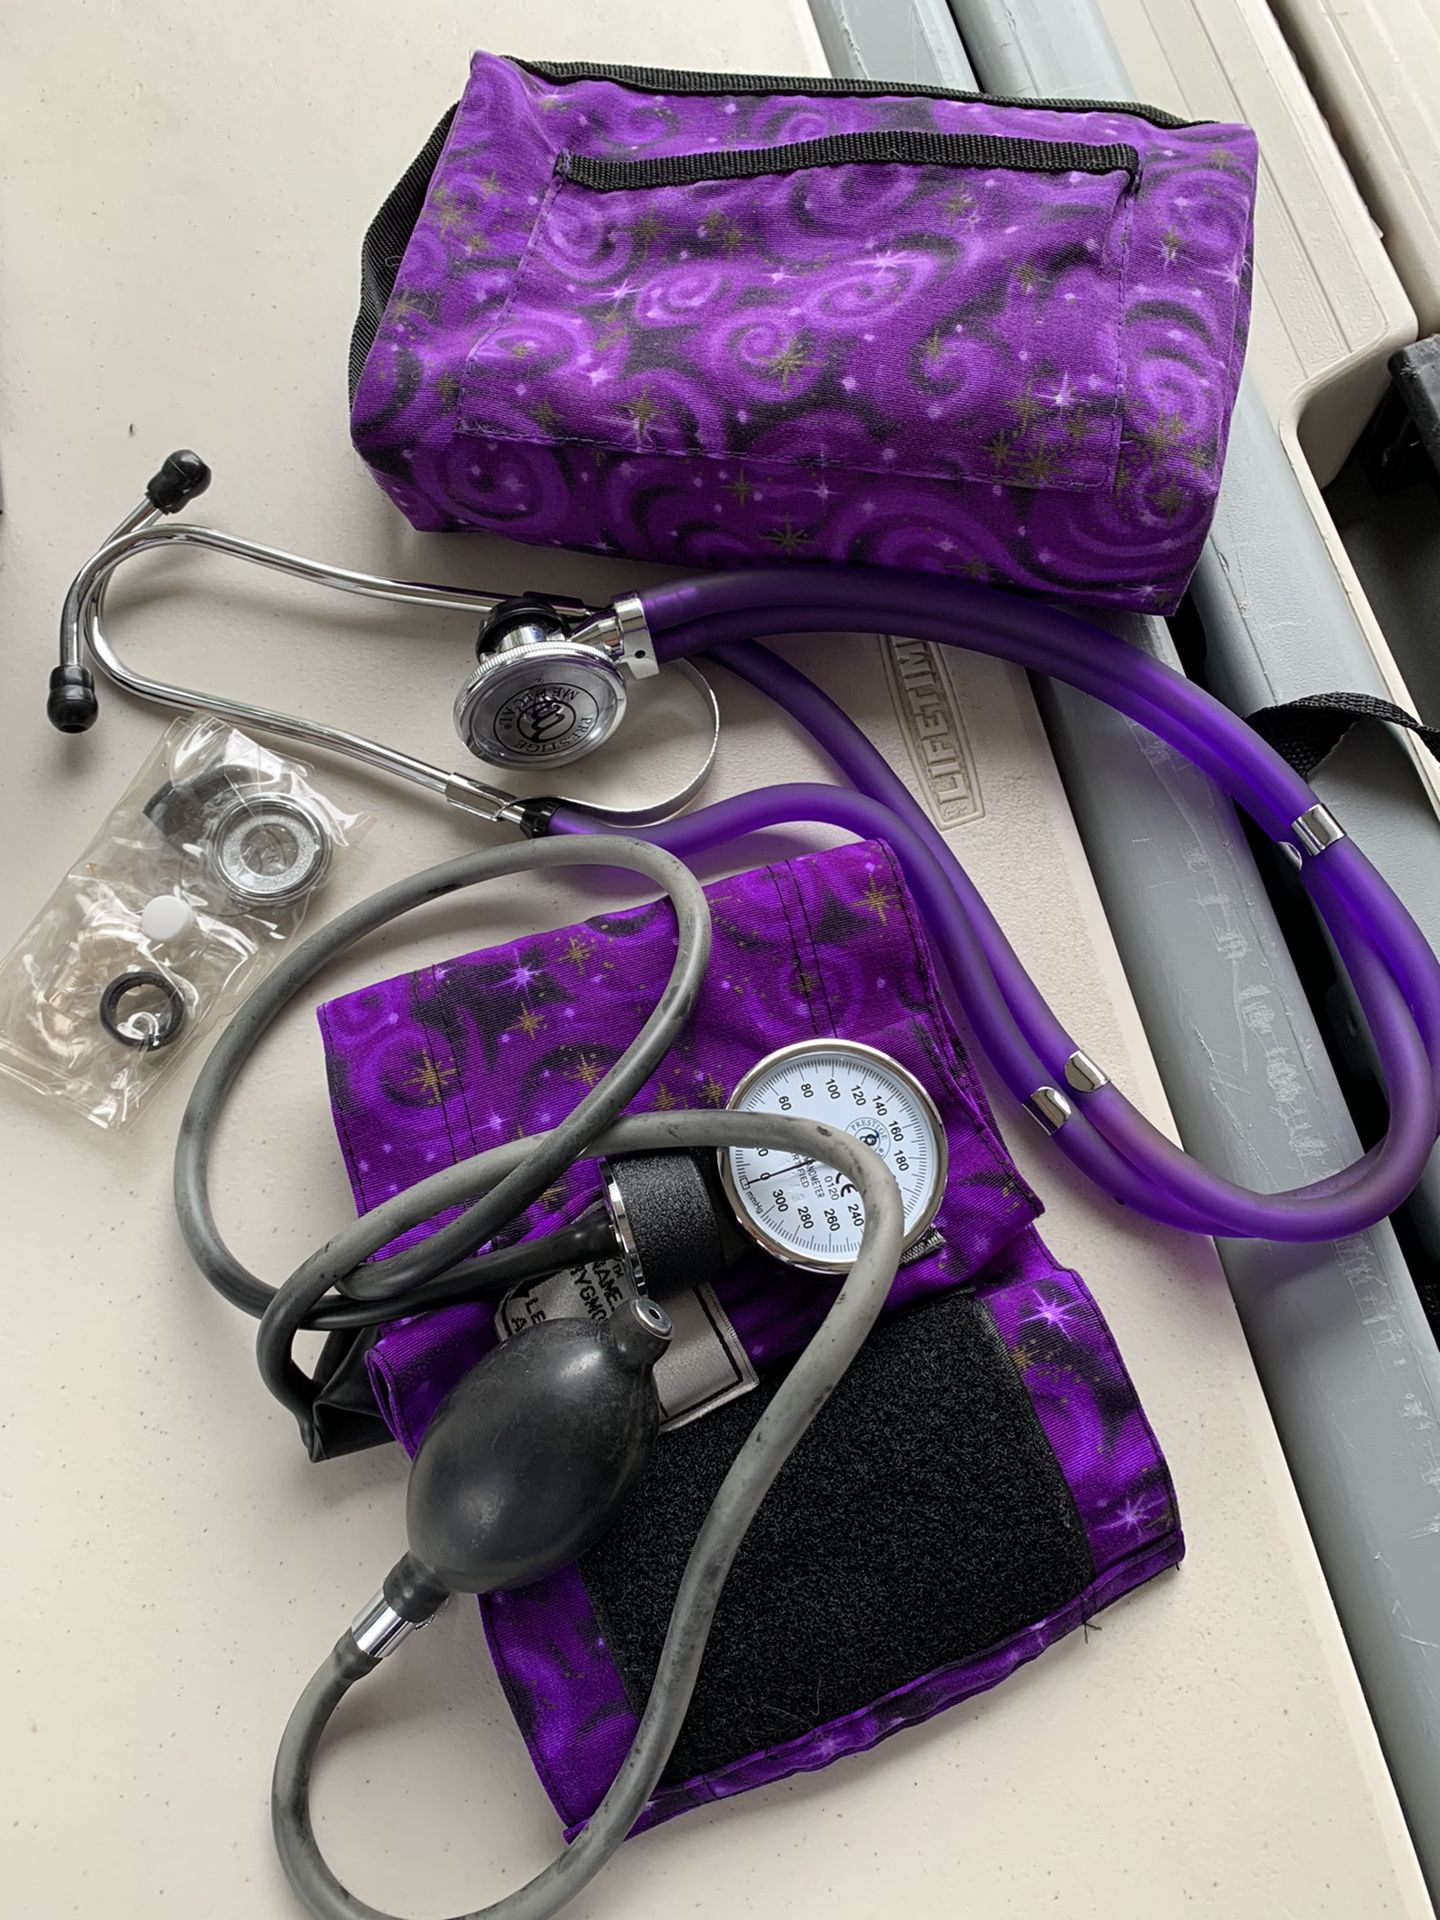 Blood Pressure Kit And Stethoscope 